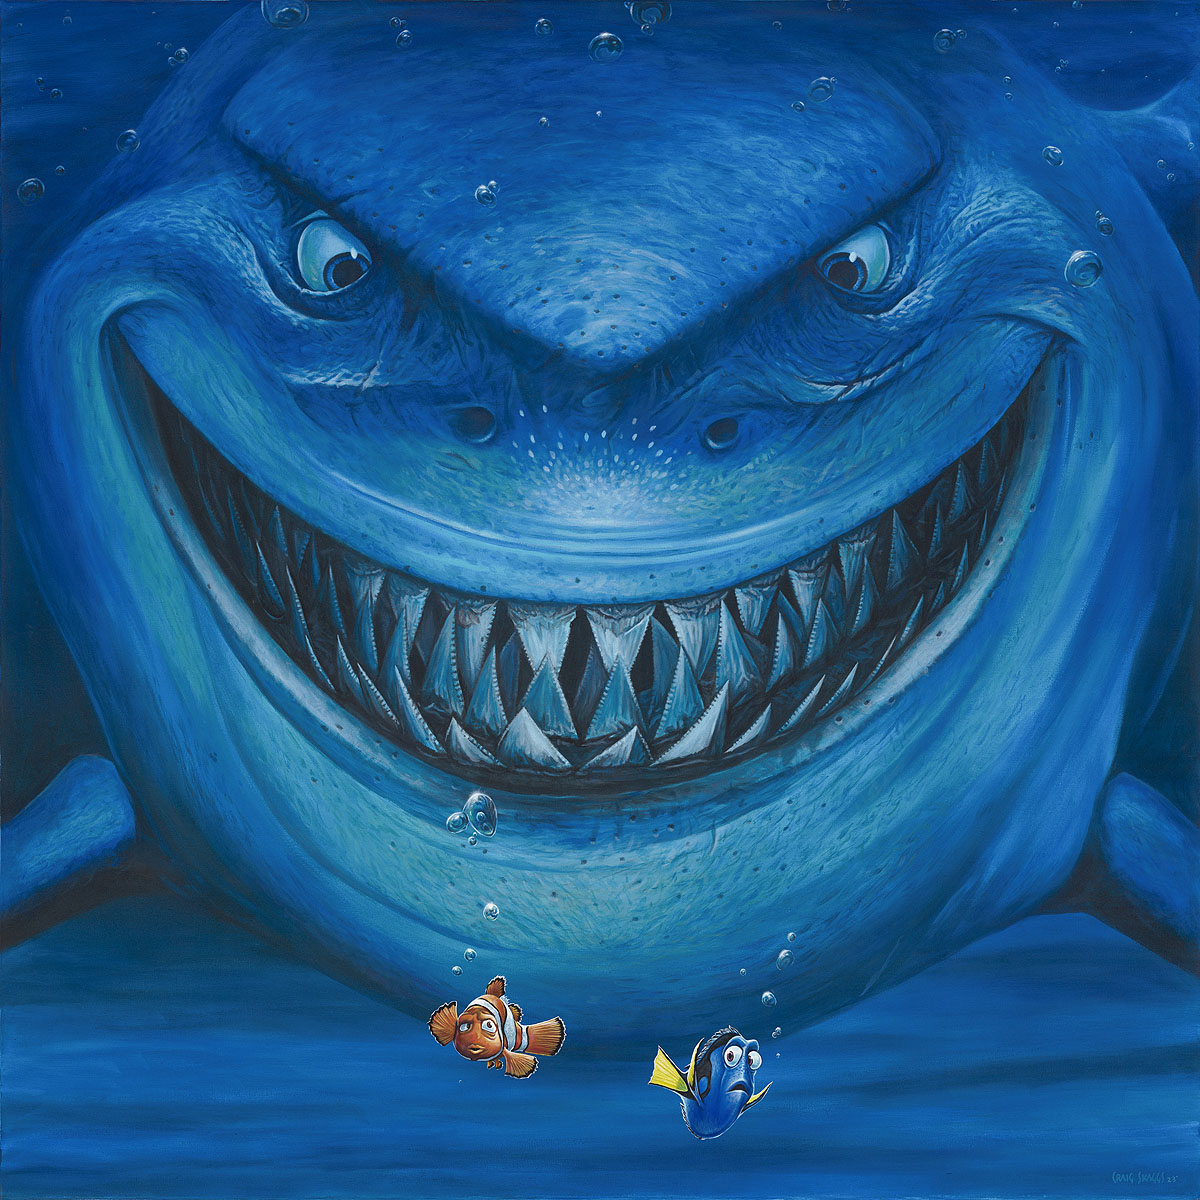 Hello! by Craig Skaggs - Giclée on Canvas - Inspired by Finding Nemo